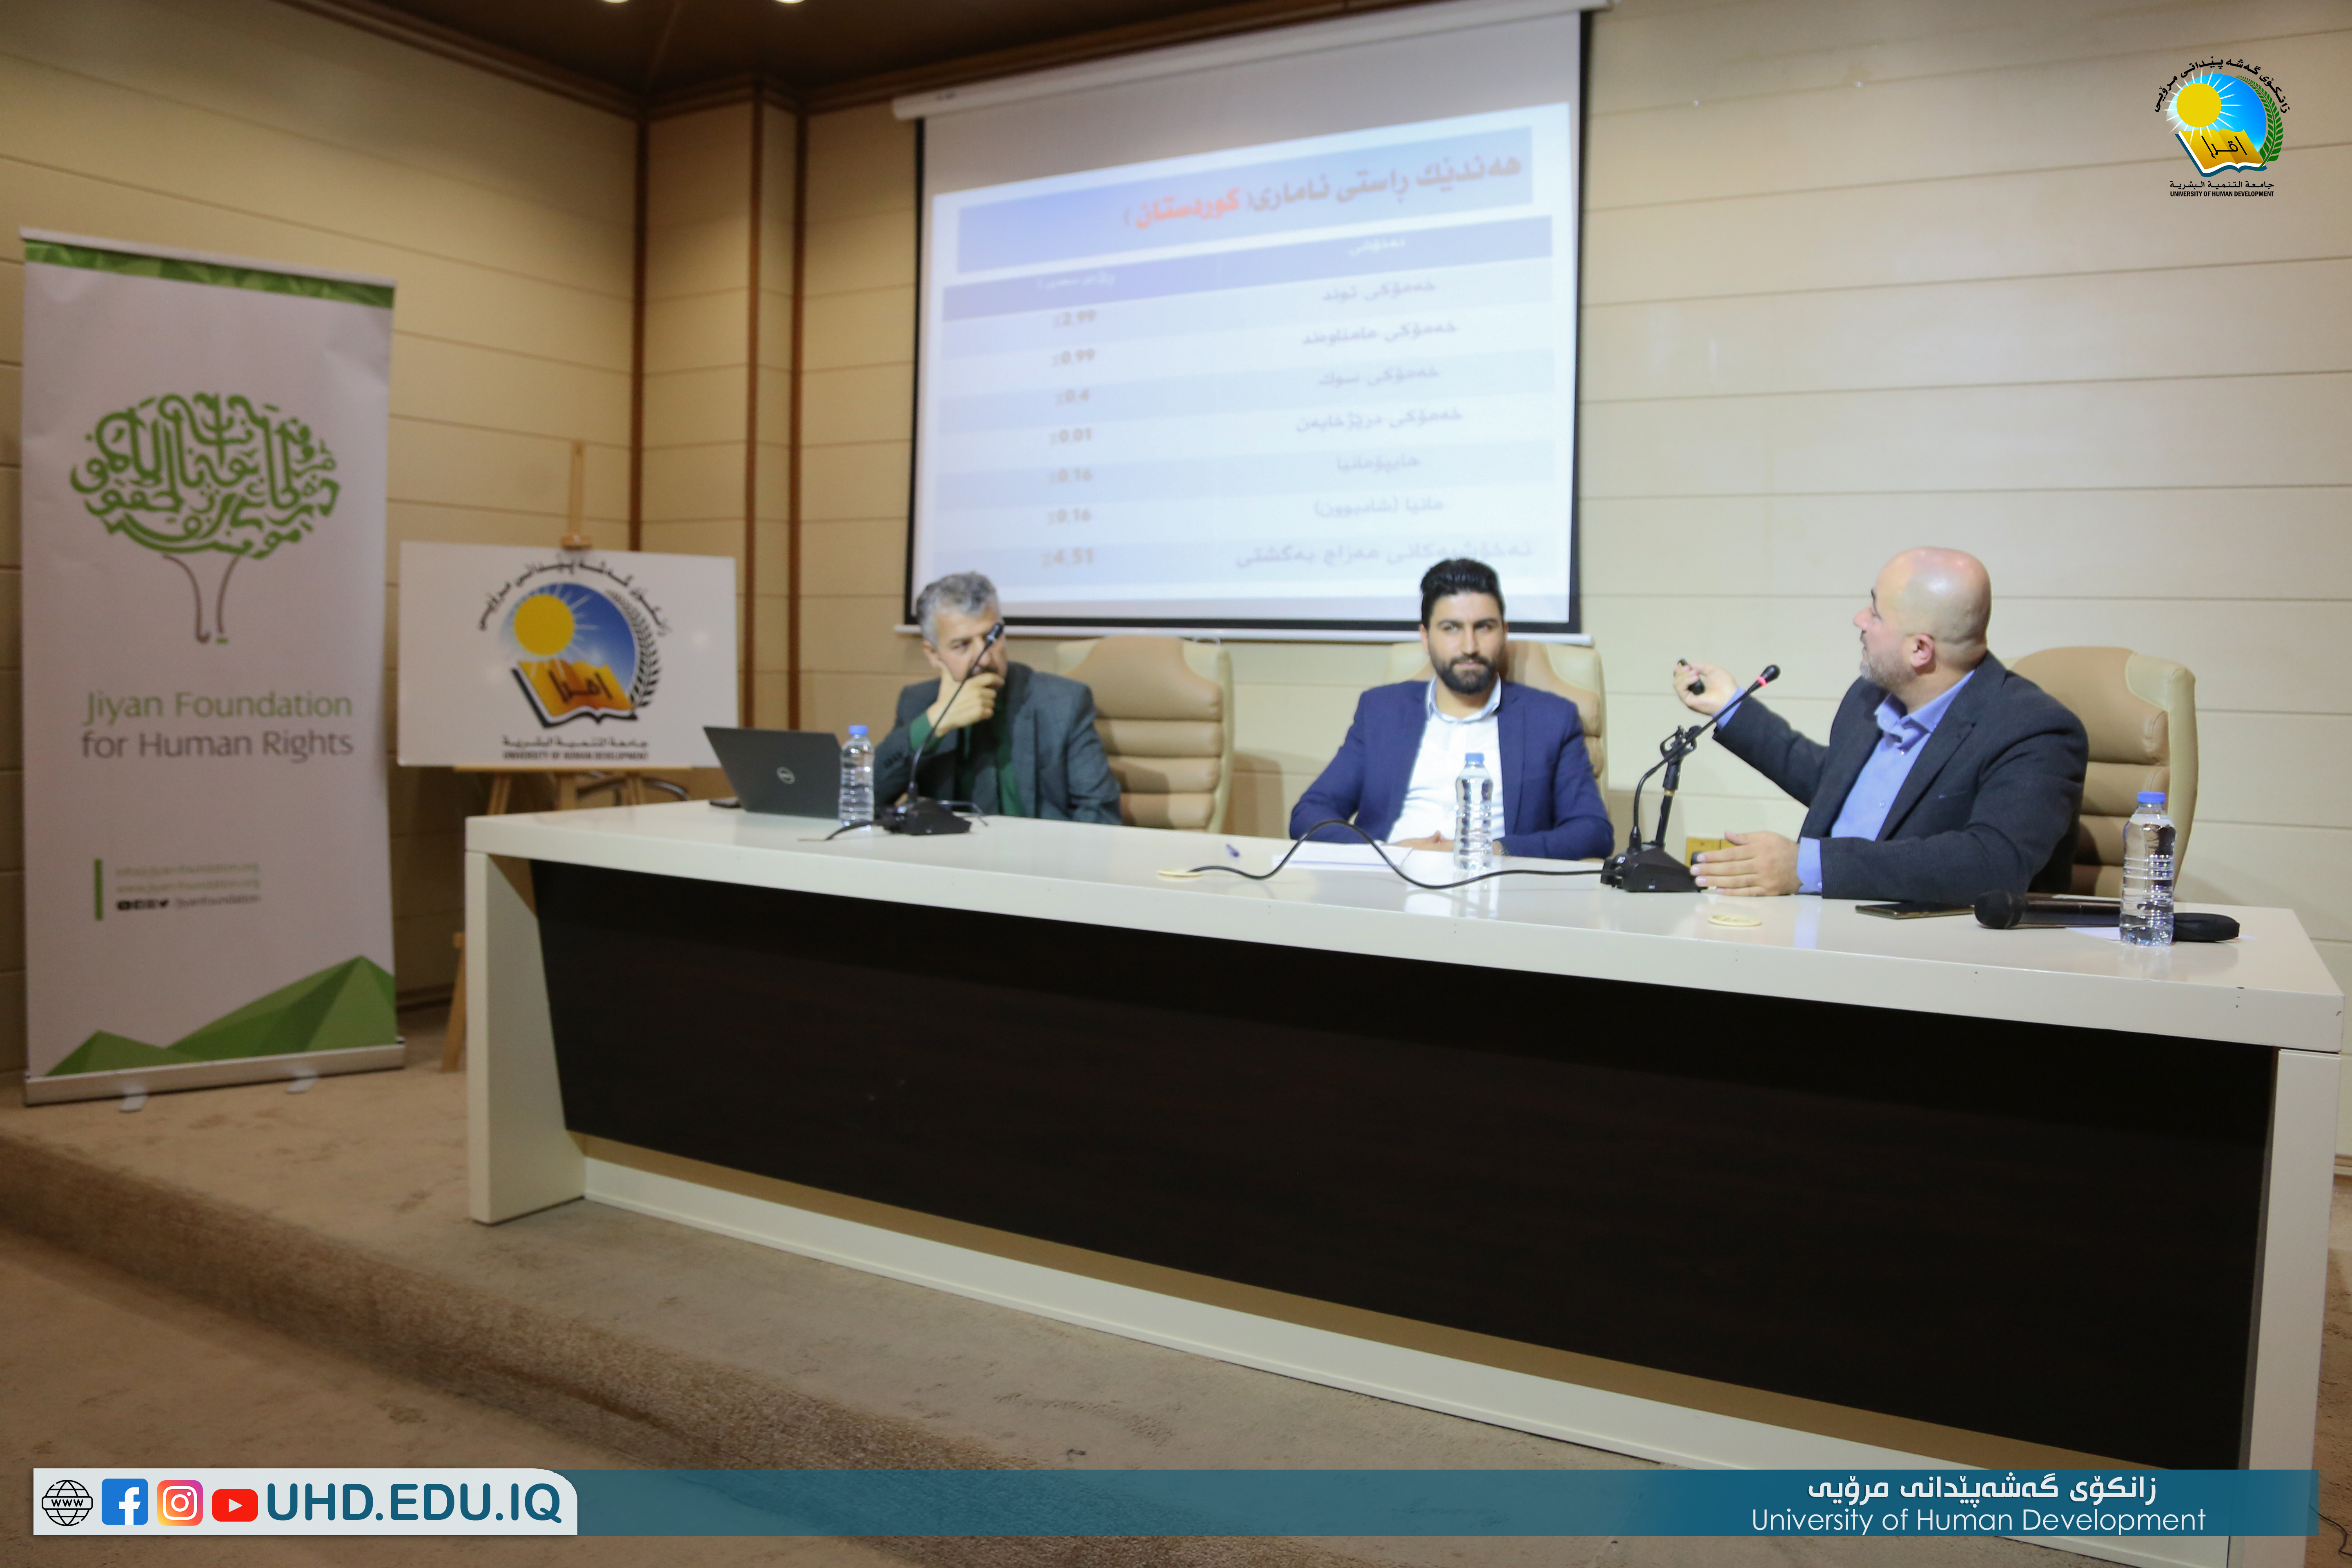 UHD and Jiyan Foundation hold joint symposium on mental health